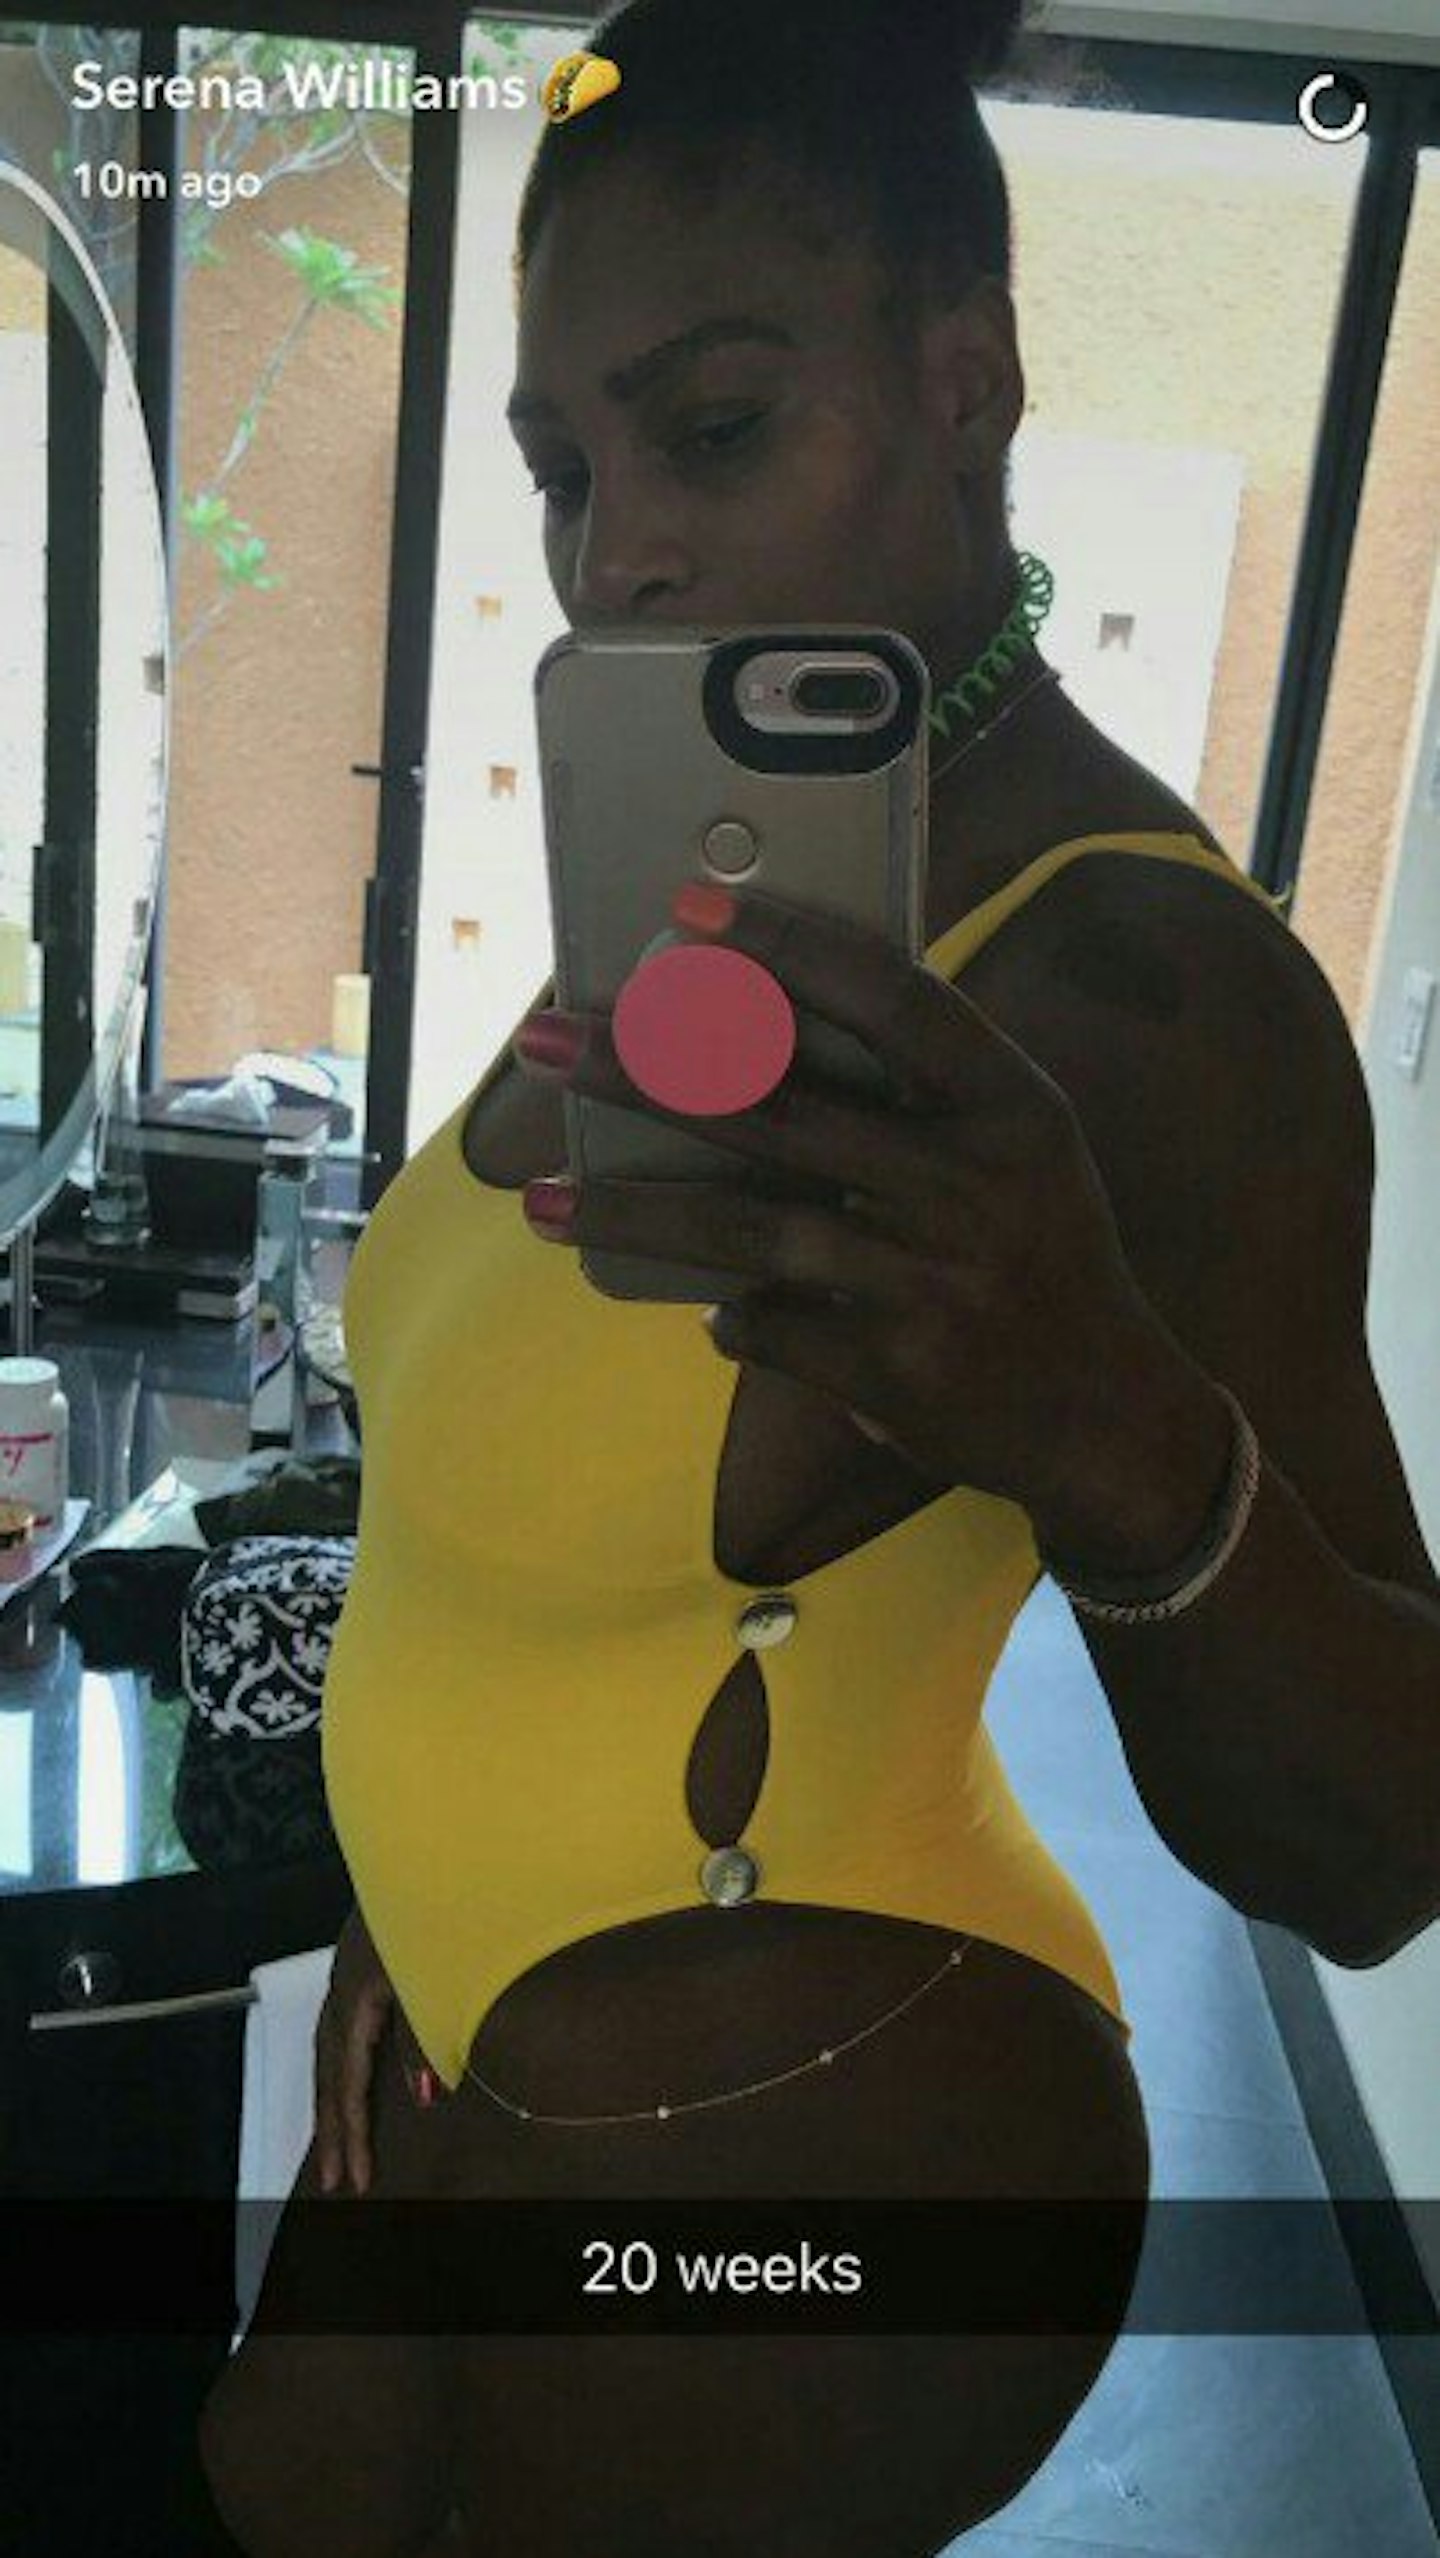 Serena Williams confirms her pregnancy on Snapchat